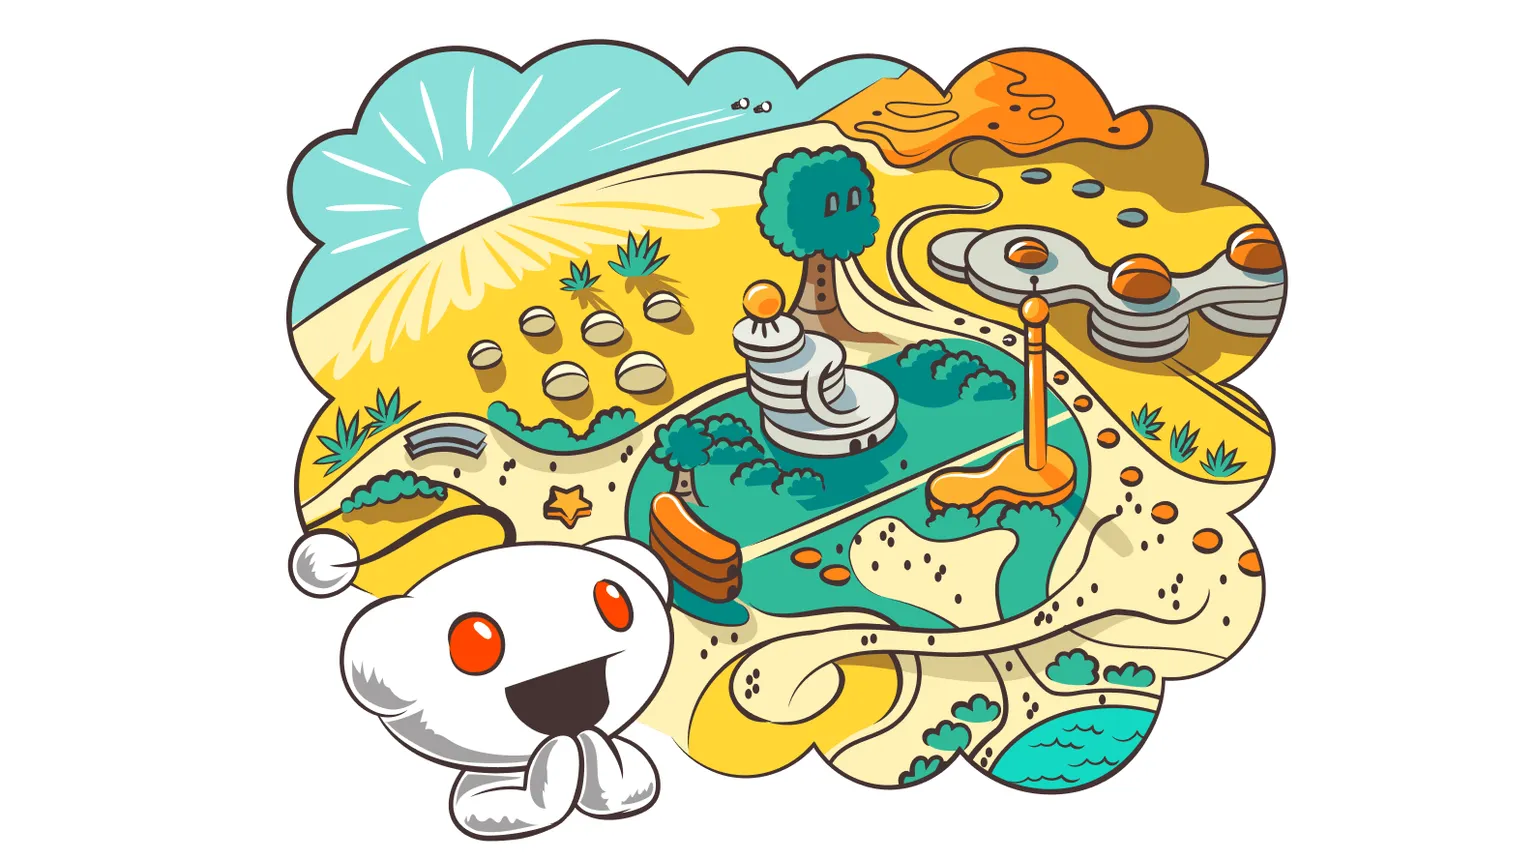 Reddit is trialling two cryptocurrencies. Image: Shutterstock.